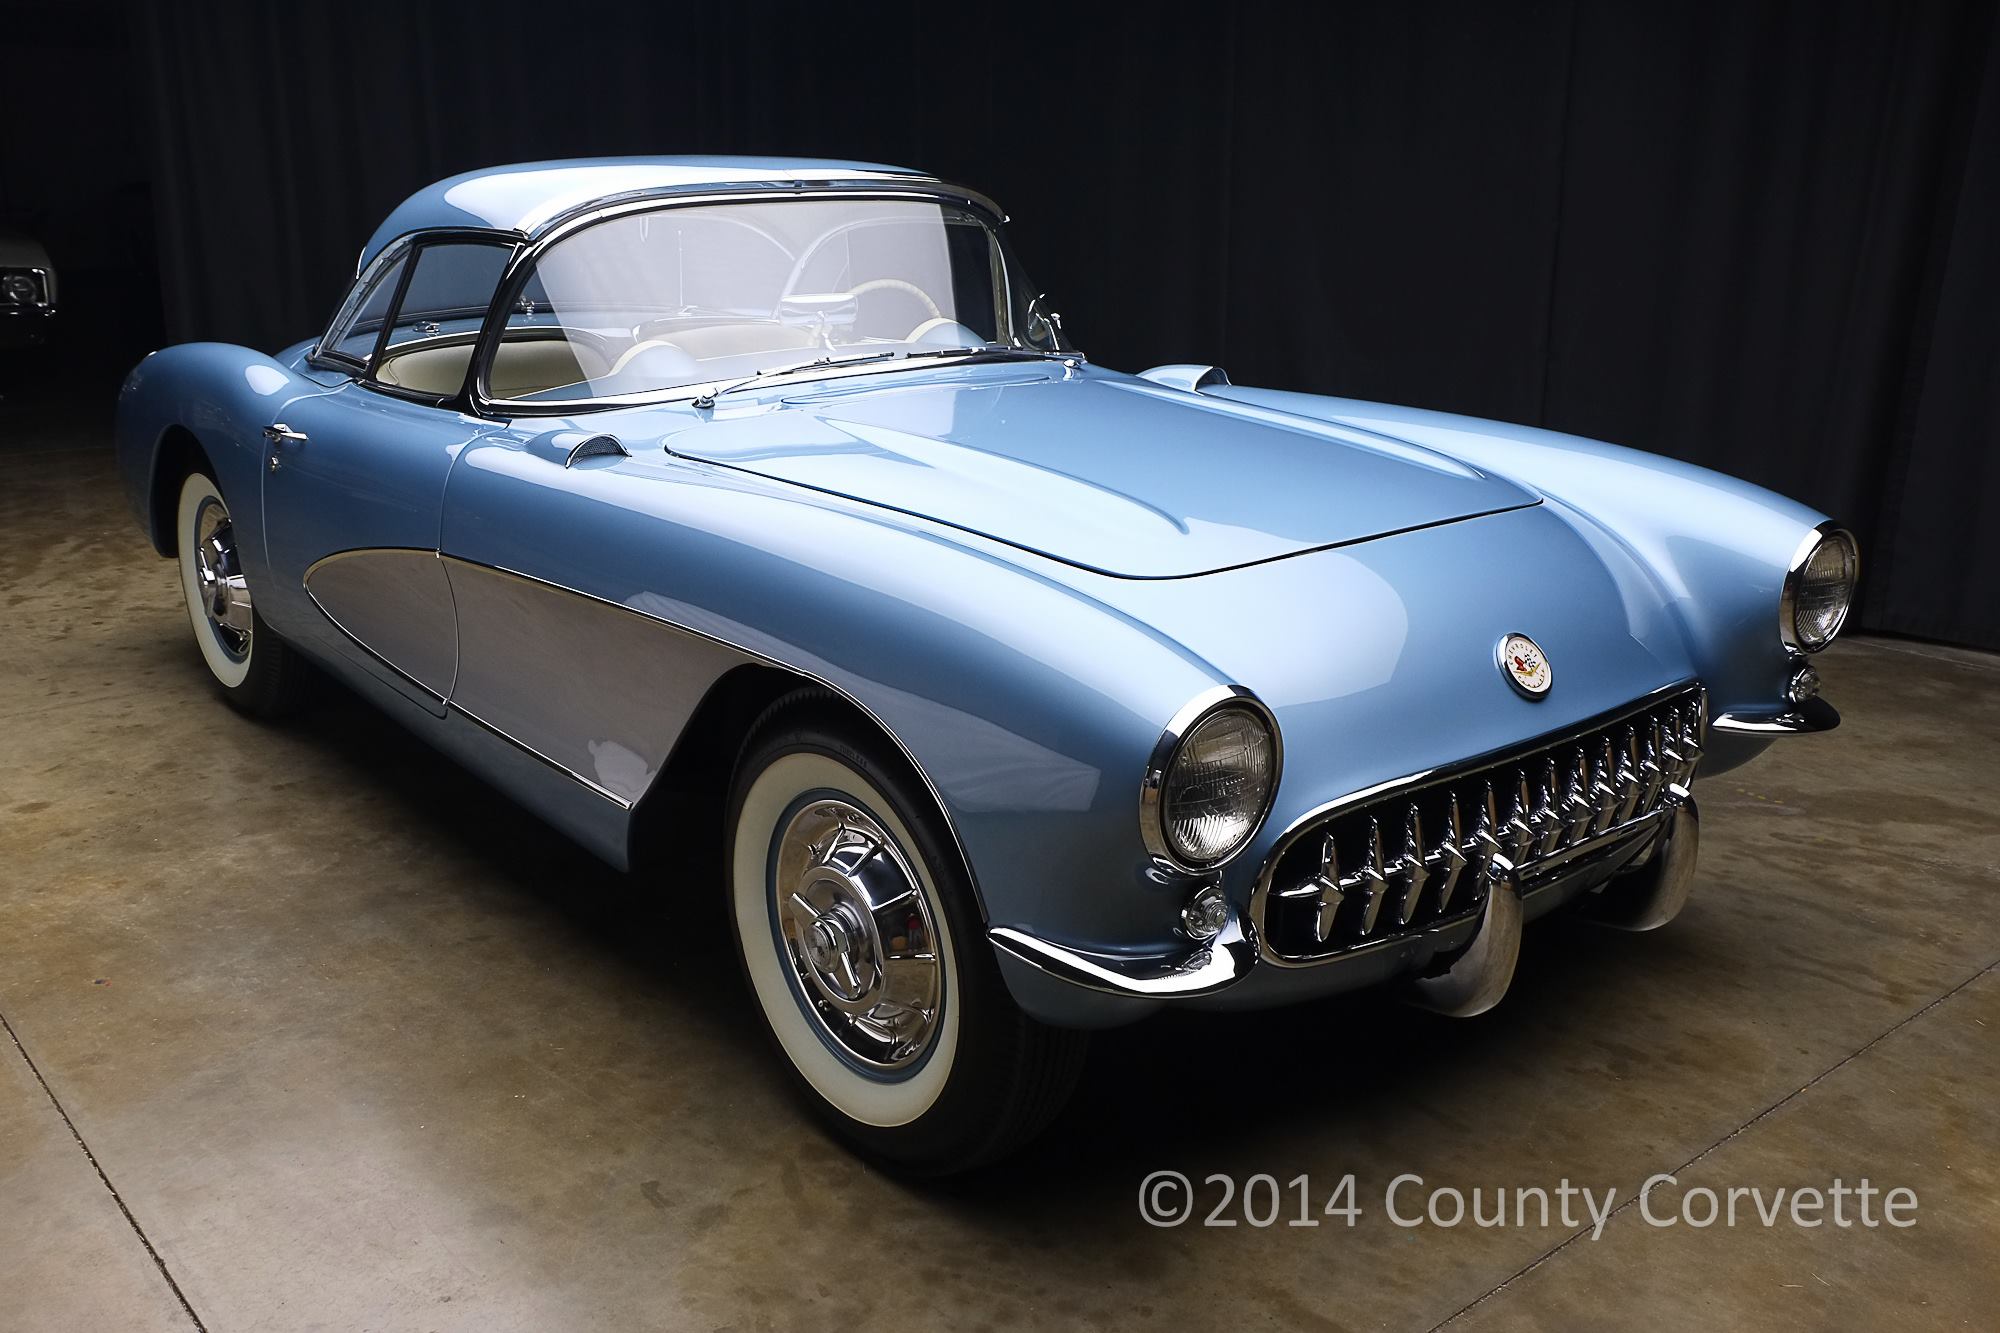  Here is a Concours restored 1957 Corvette. Done in base coat clear coat accurately matching the original Arctic Blue. Thjs type of finish is generally chosen by clients who want a car that looks the best it possibly can. We also improve body gaps an